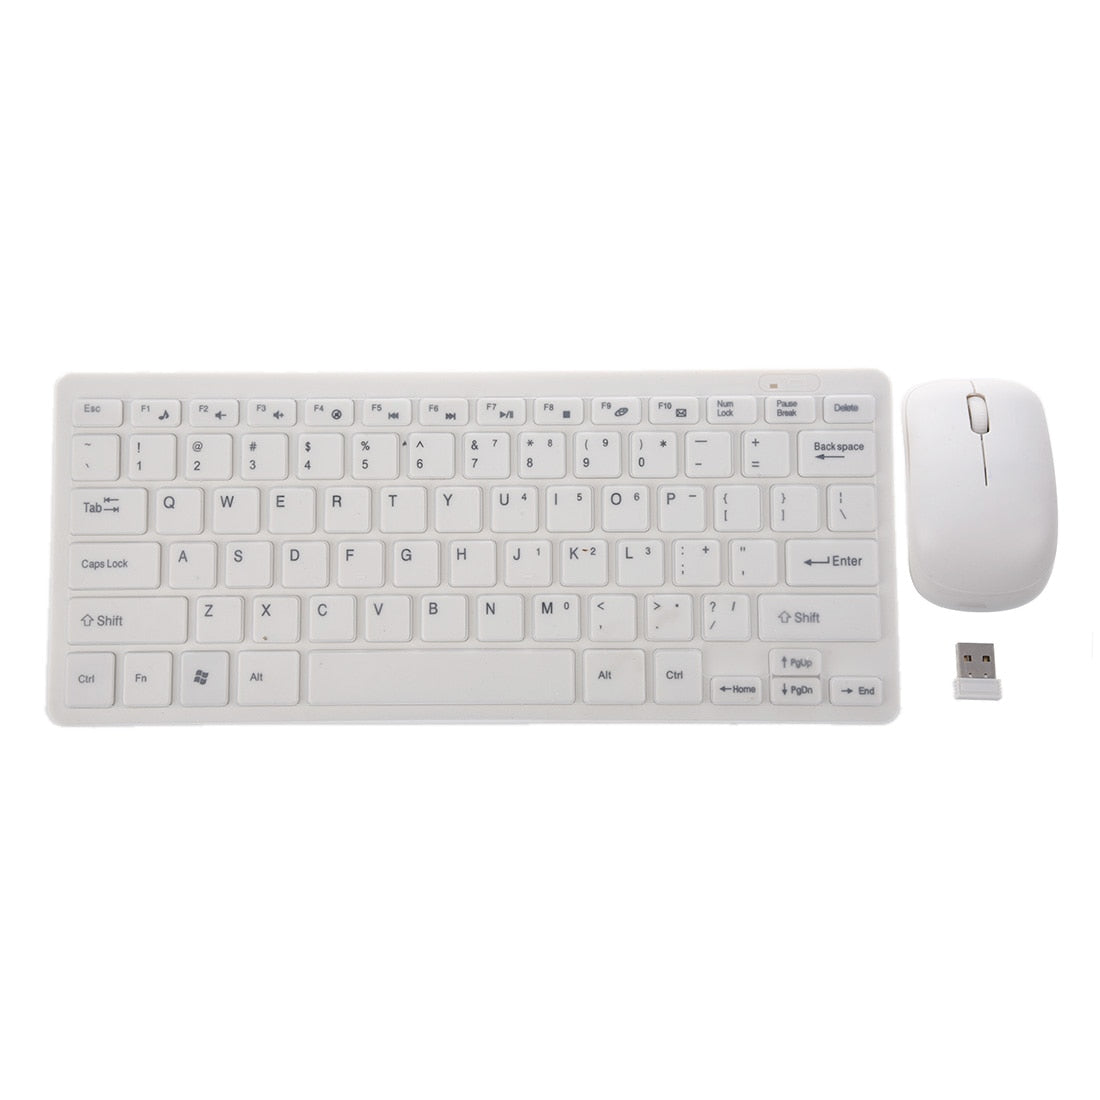 2.4GHz Wireless Portable Keyboard and Mouse Set